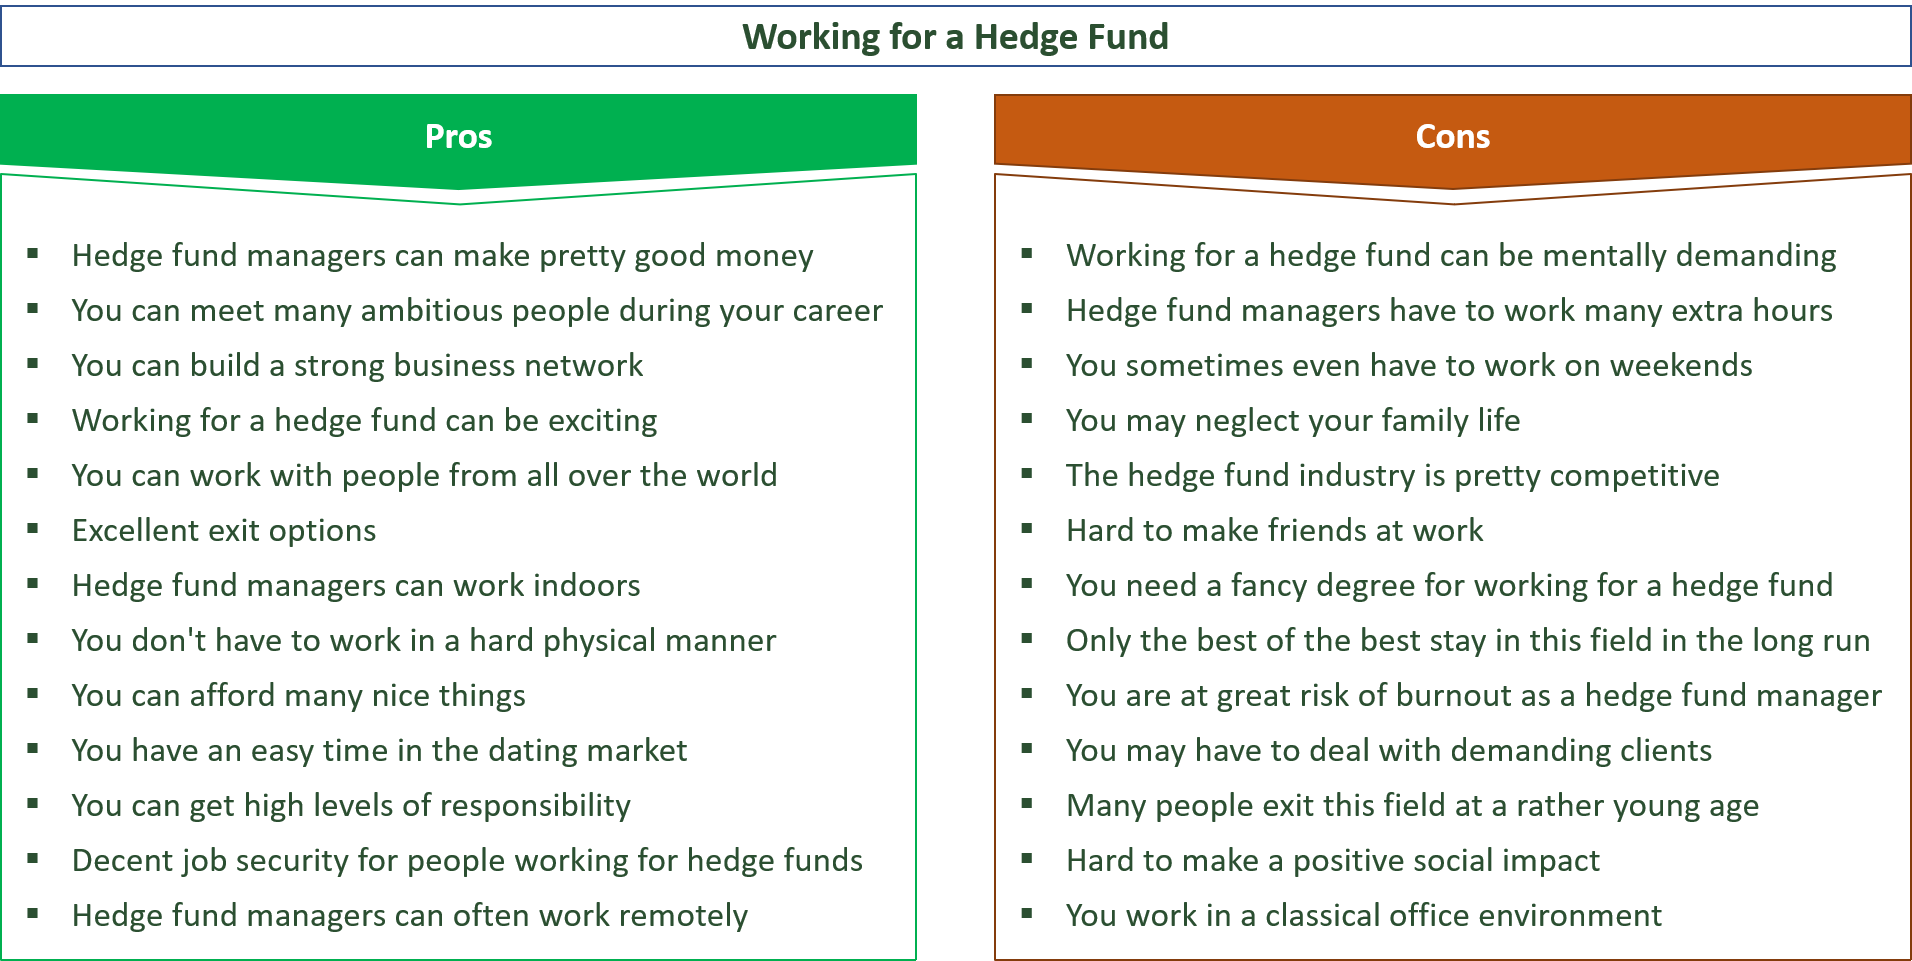 advantages and disadvantages of working for a hedge fund